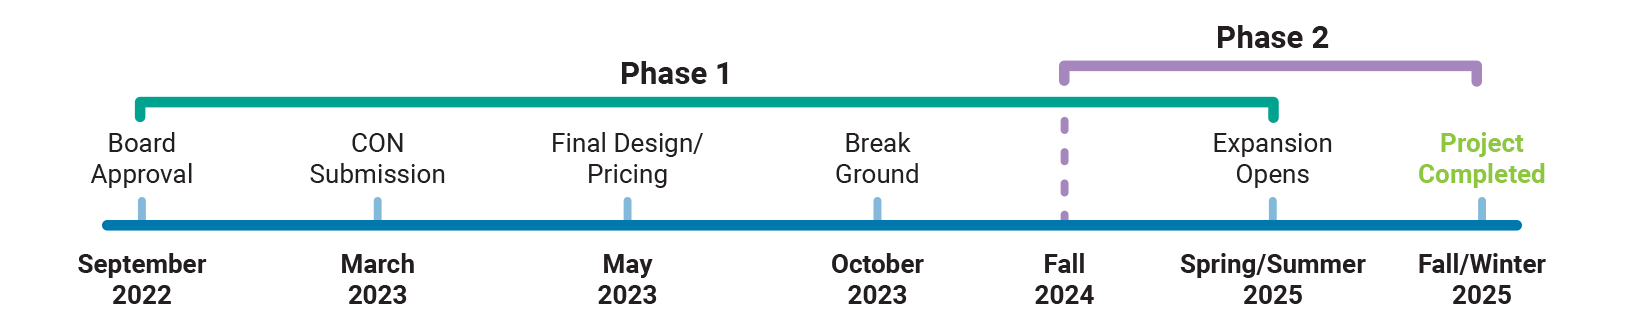 Project Timeline: Phase 1 starts Sep. 2022; Board approval Sep. 2022; CON Submission Mar. 2023; Final Design/Pricing May 2023; Break Ground Oct. 2023; Phase 2 starts Fall 2024; Expansion Opens Spring/Summer 2025; Project Completed Fall/Winter 2025